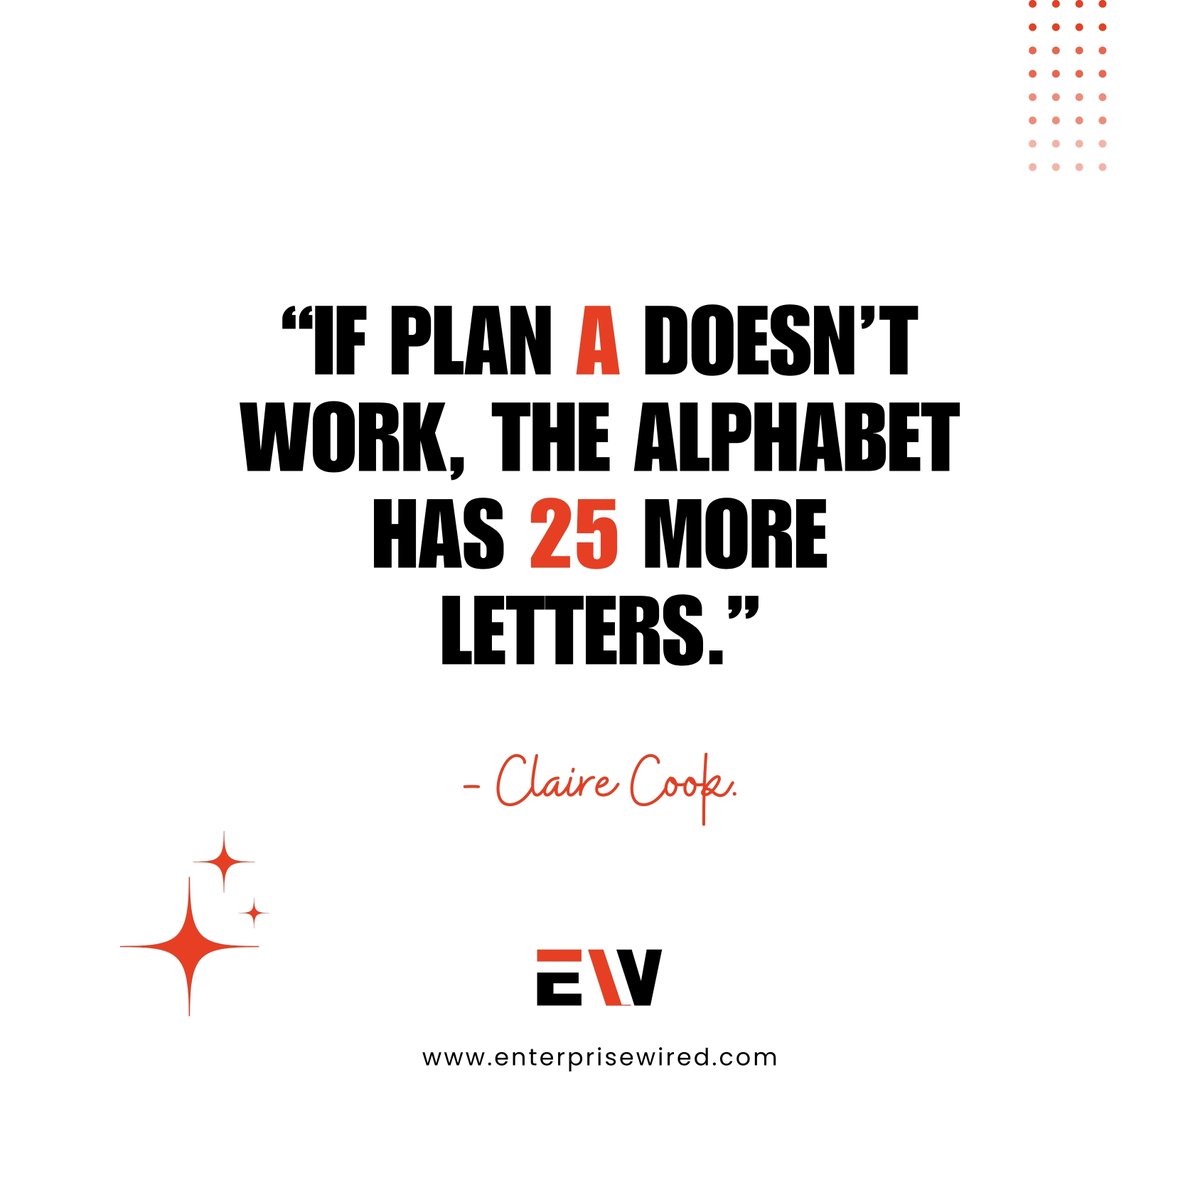 If not now then afterwards, but you’ll find a way that works if you keep trying.

Follow @enterprisewired for more.

#keeptrying #persistence #successmindset #PlanB #nevergiveup #alternativeroutes #creativethinking #motivationmonday #inspirational